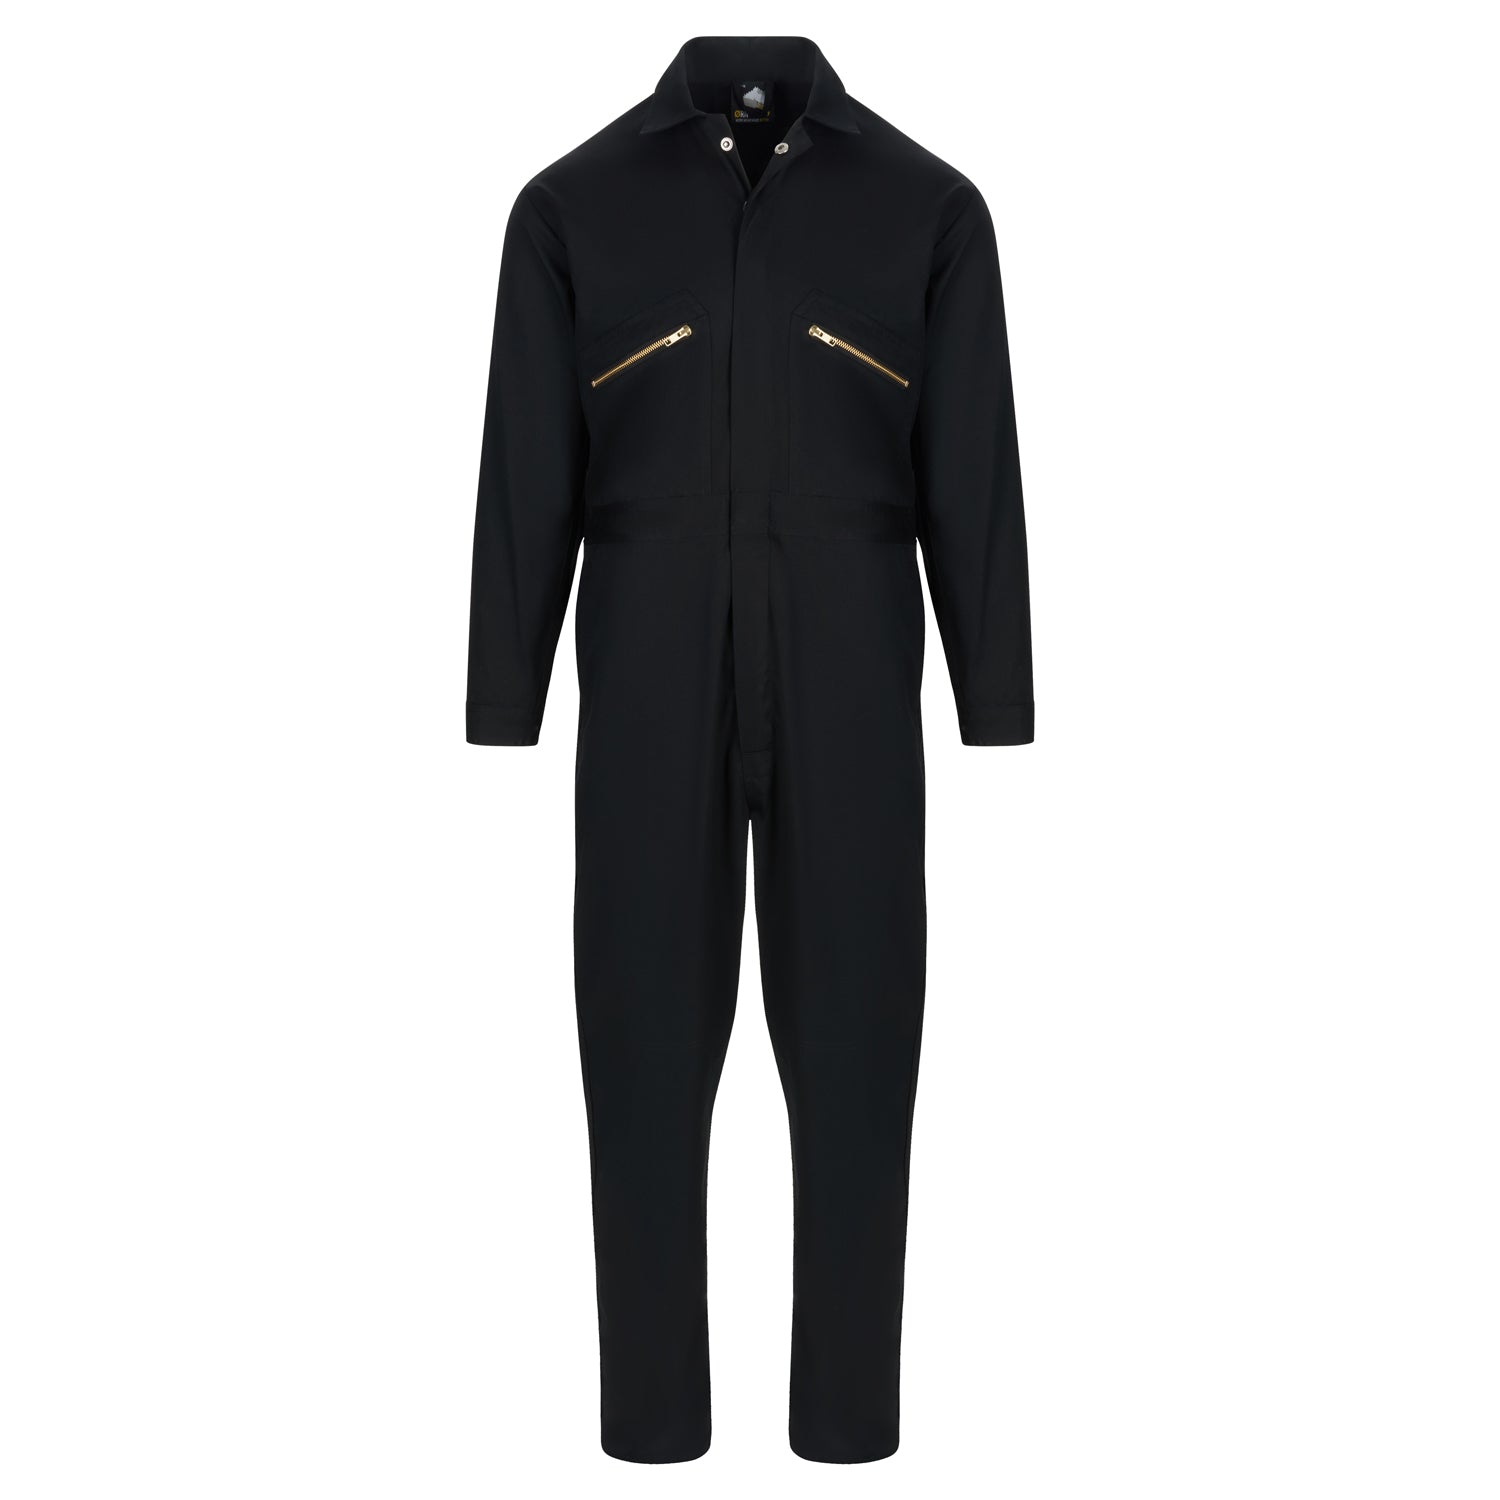 ORN Scoter Coverall